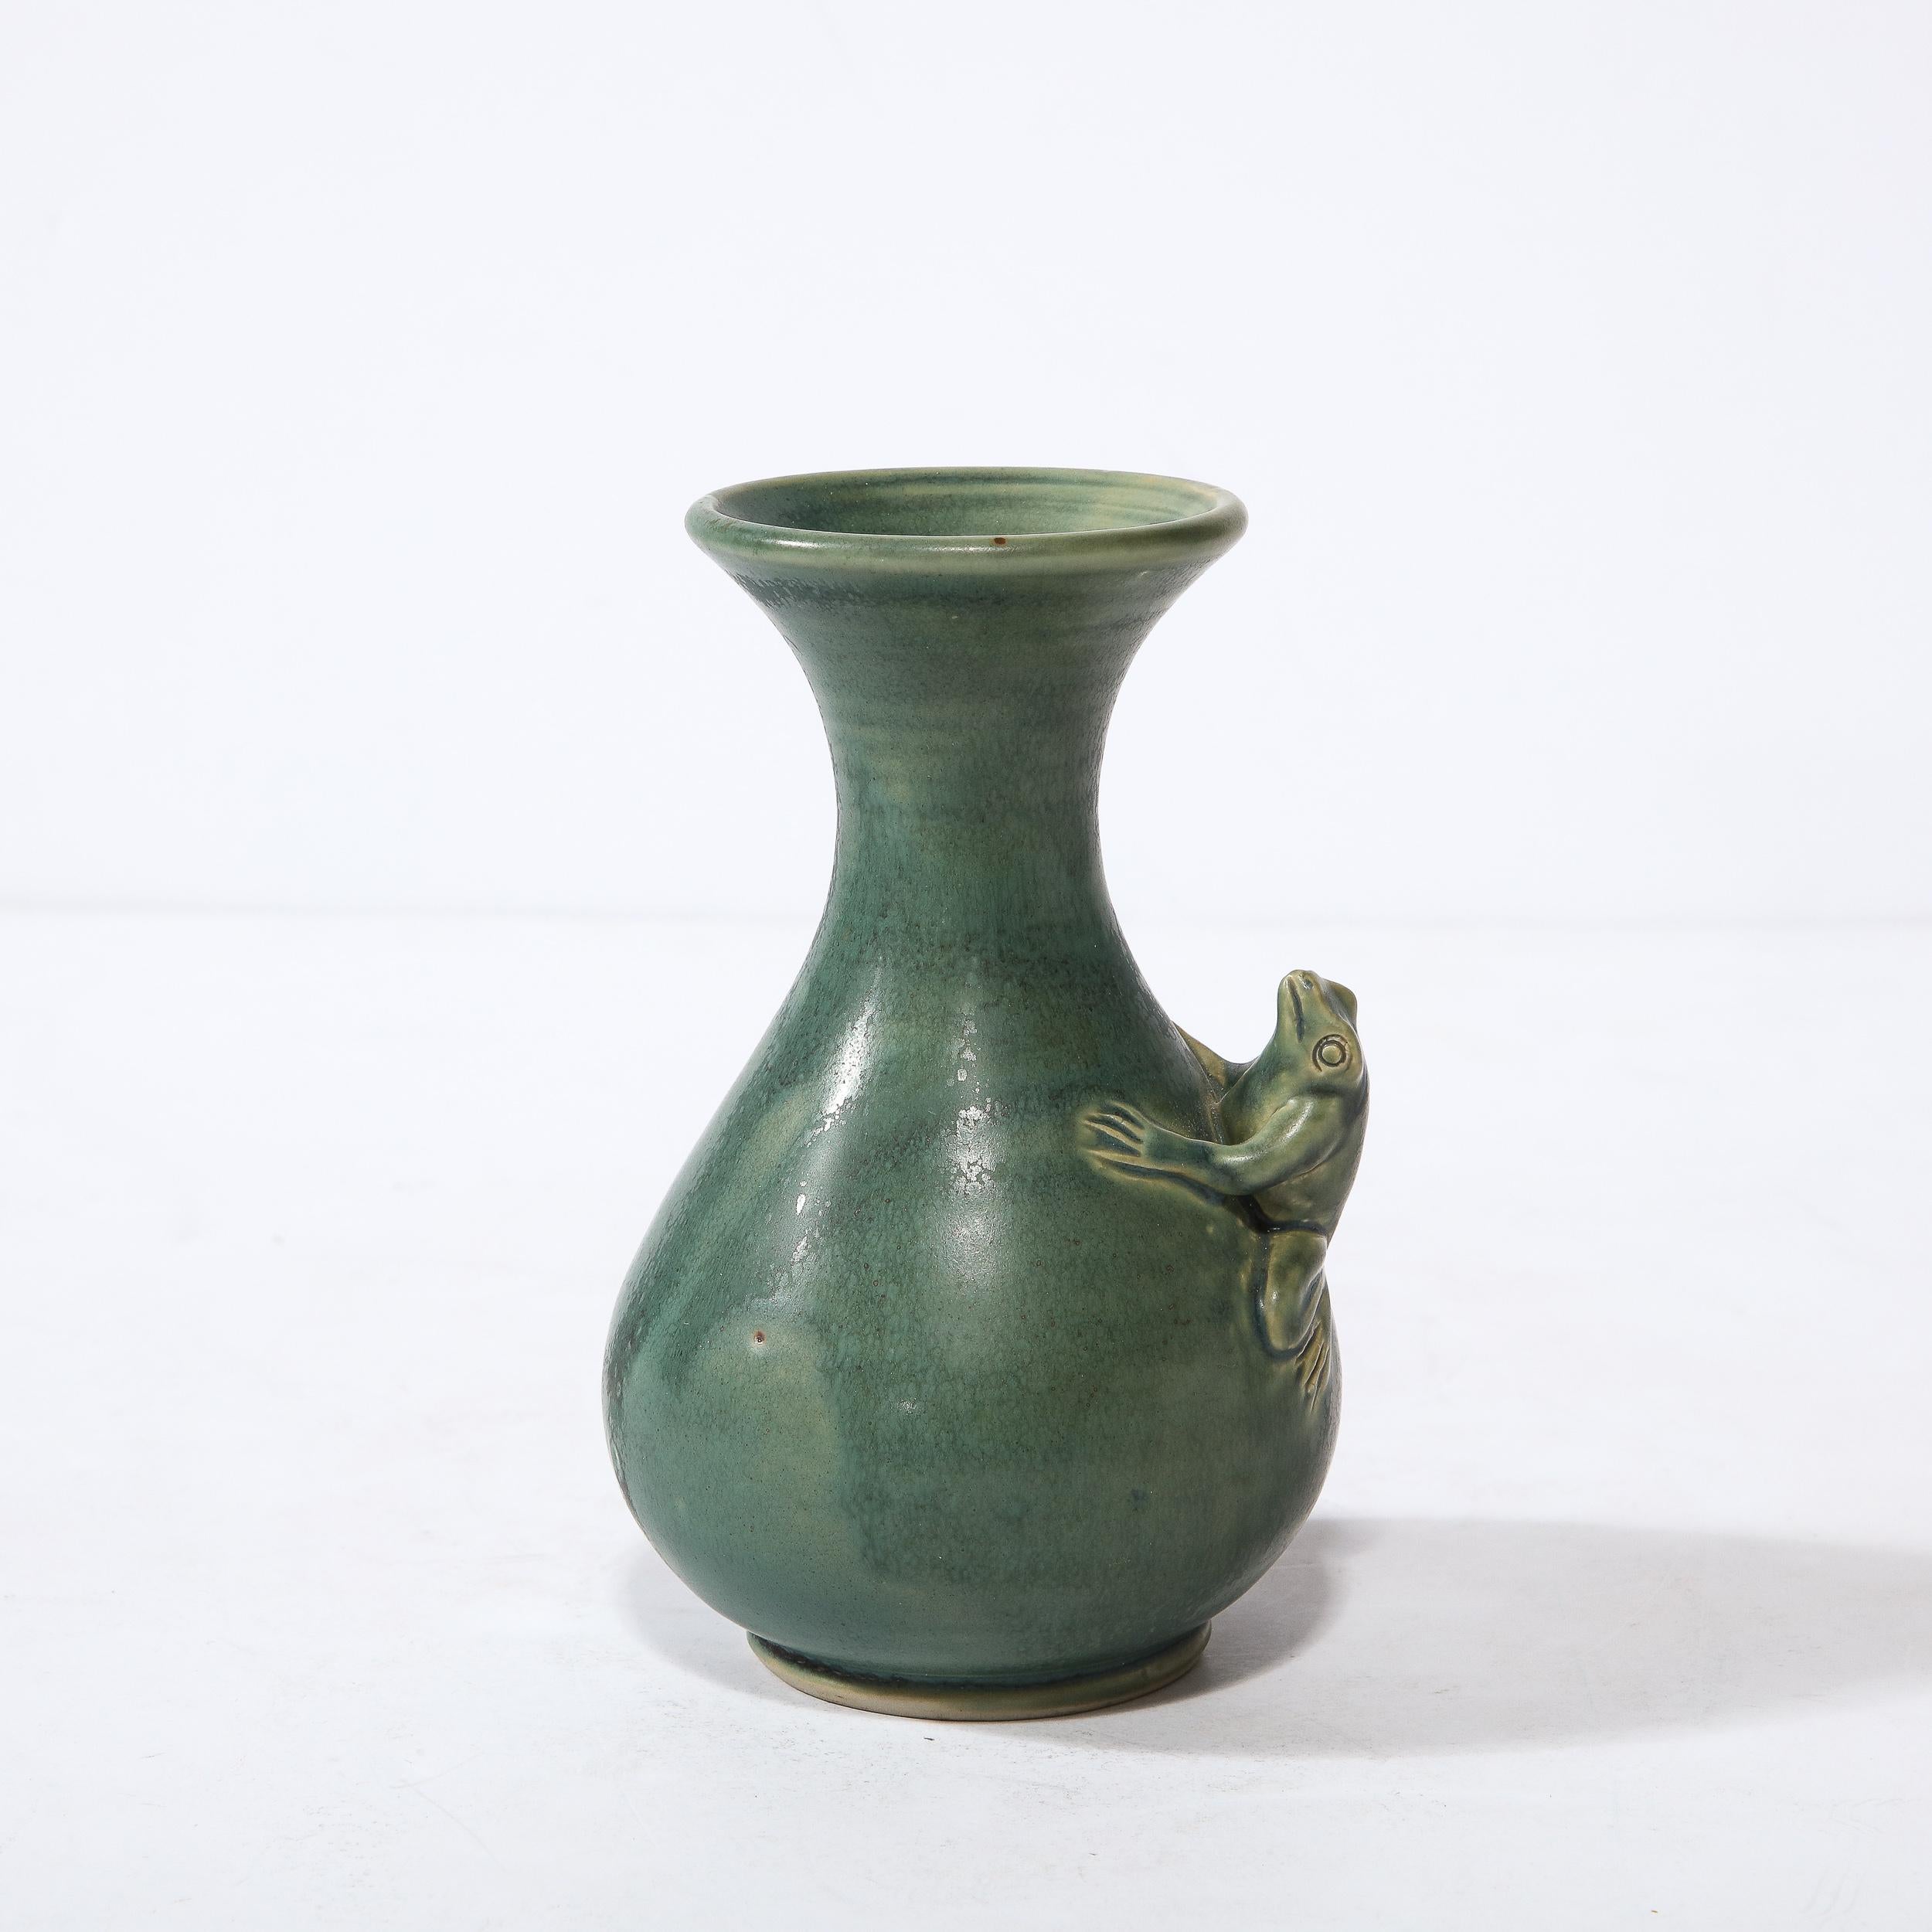 Indonesian Modernist Sculptural Muted Jade Glazed Ceramic Vase with Frog Motif in Relief For Sale